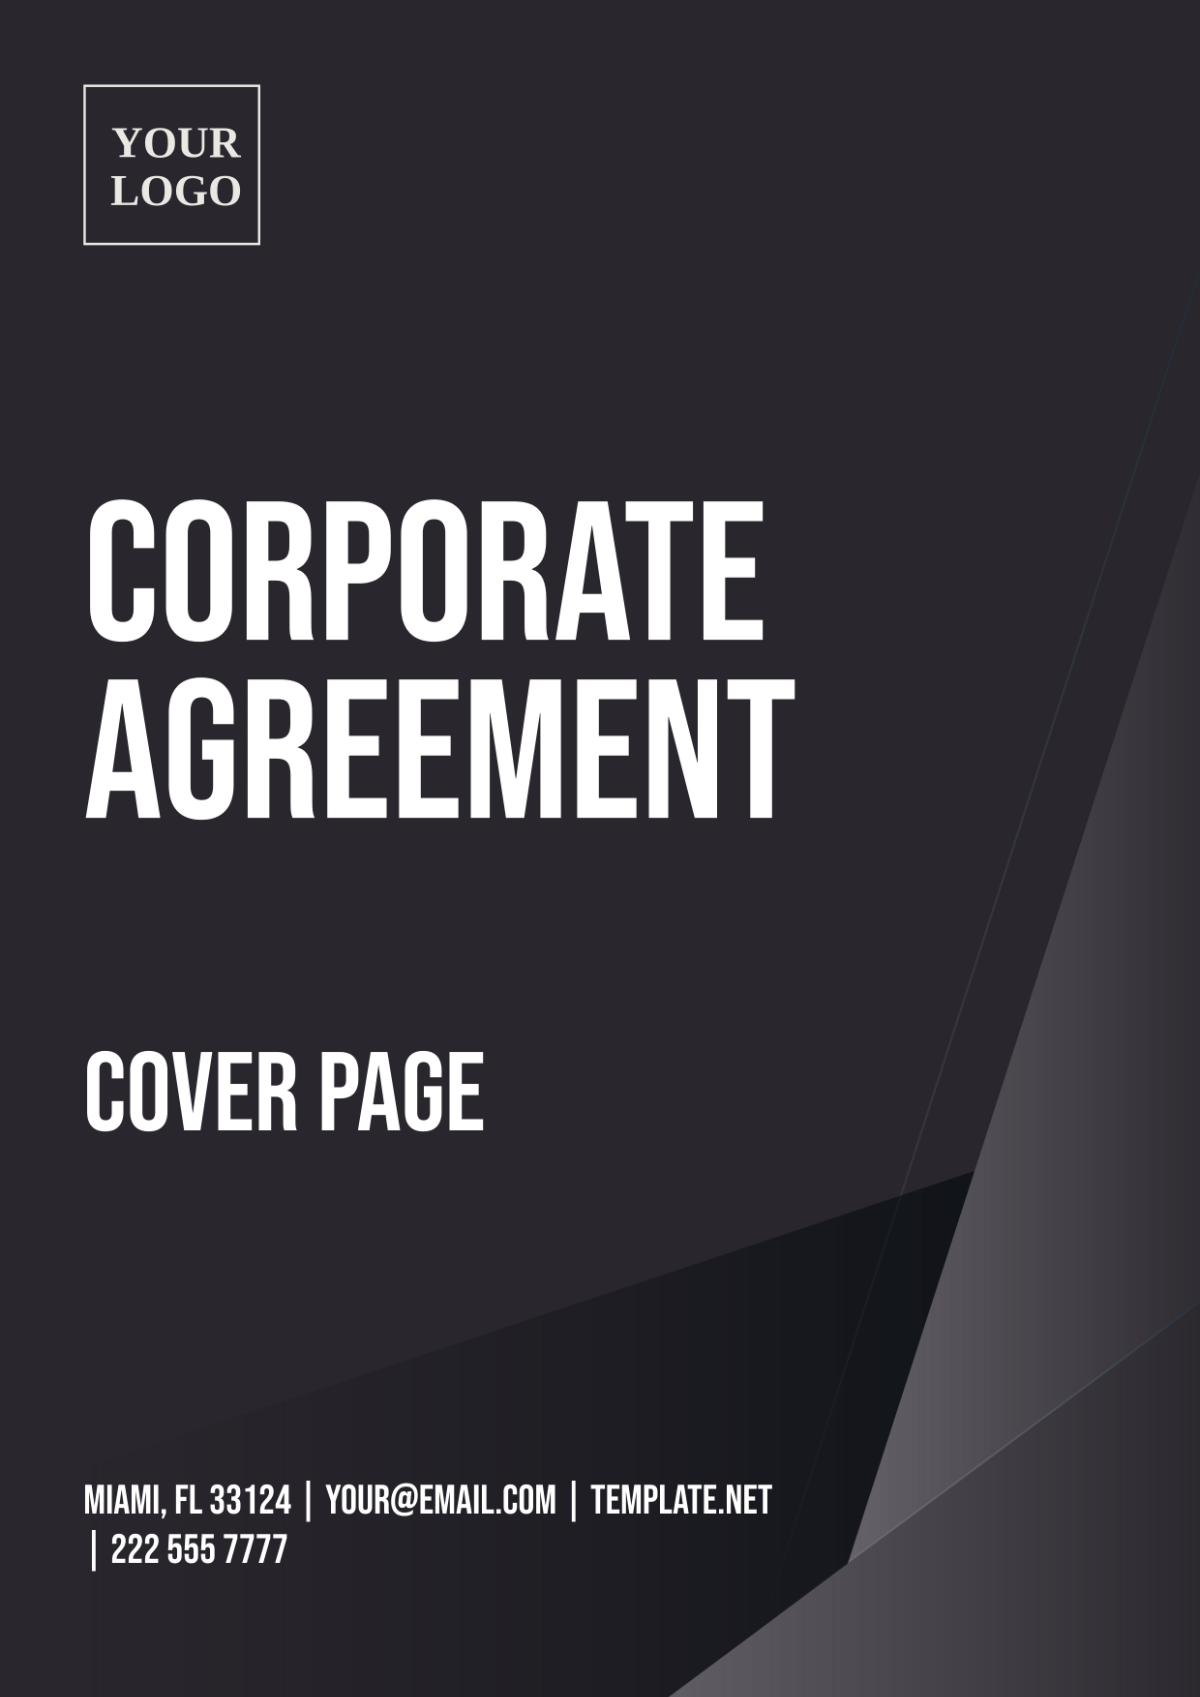 Corporate Agreement Cover Page